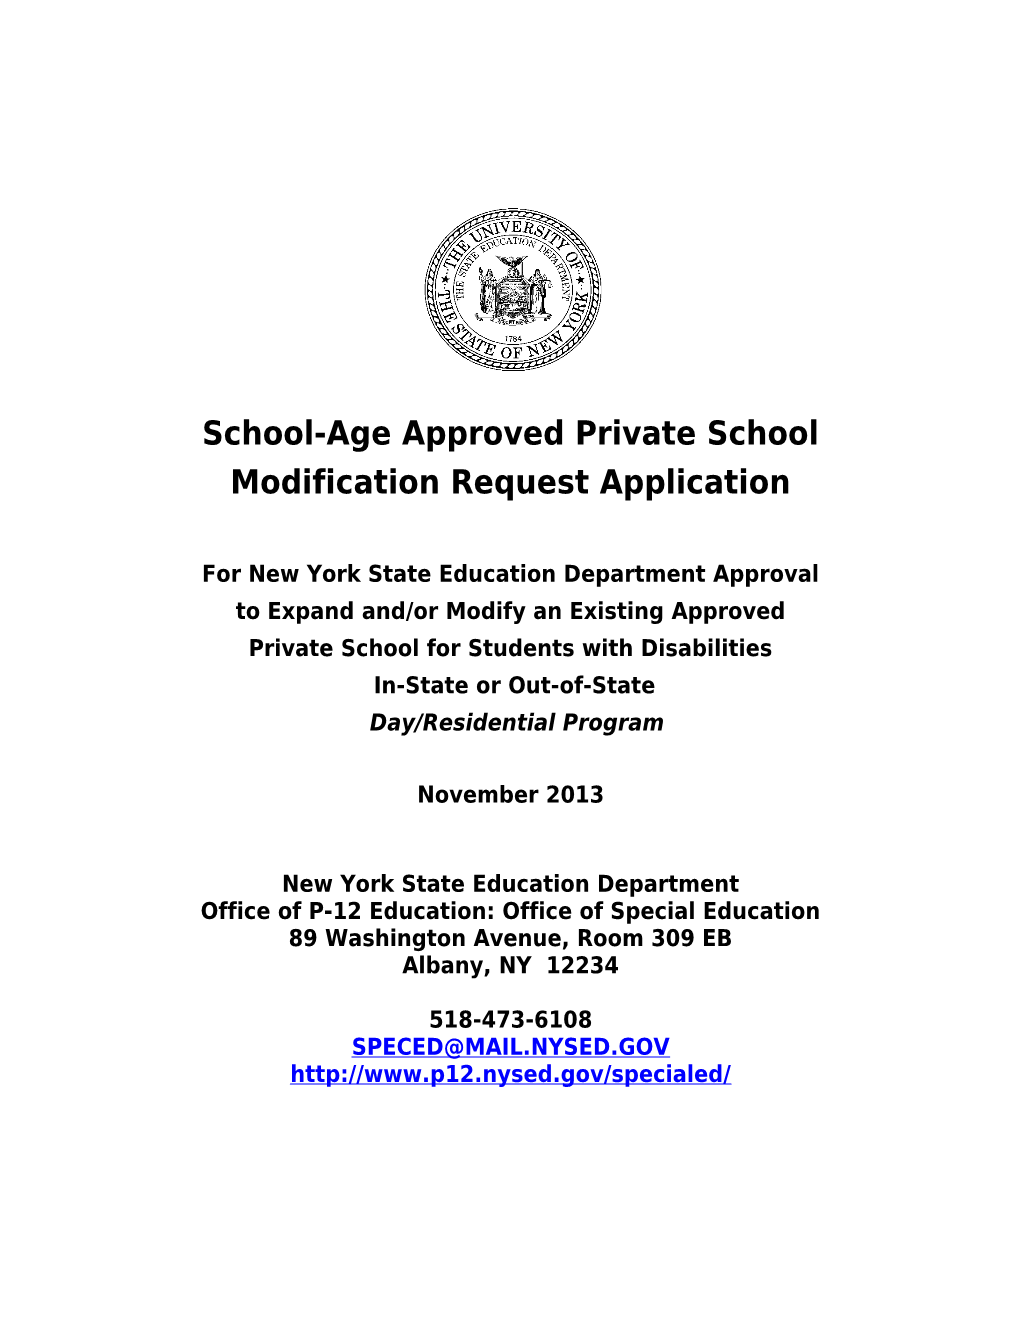 School-Age Approved Private School